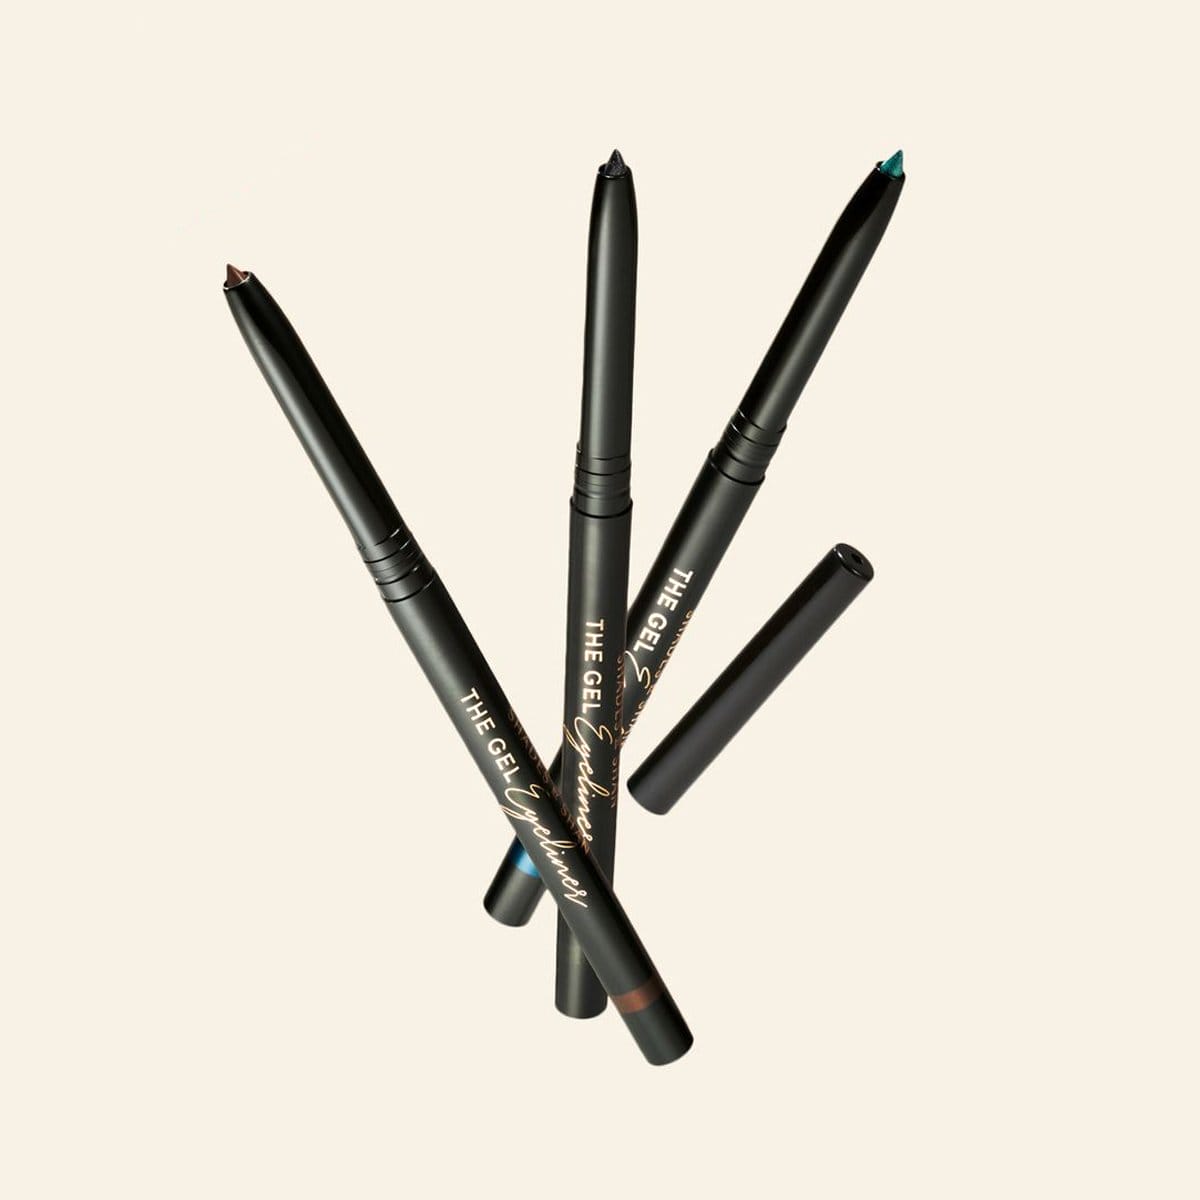 ELLE Loves: A Gel Eyeliner Committed to Shimmer, Shine, and Supporting Single Parents